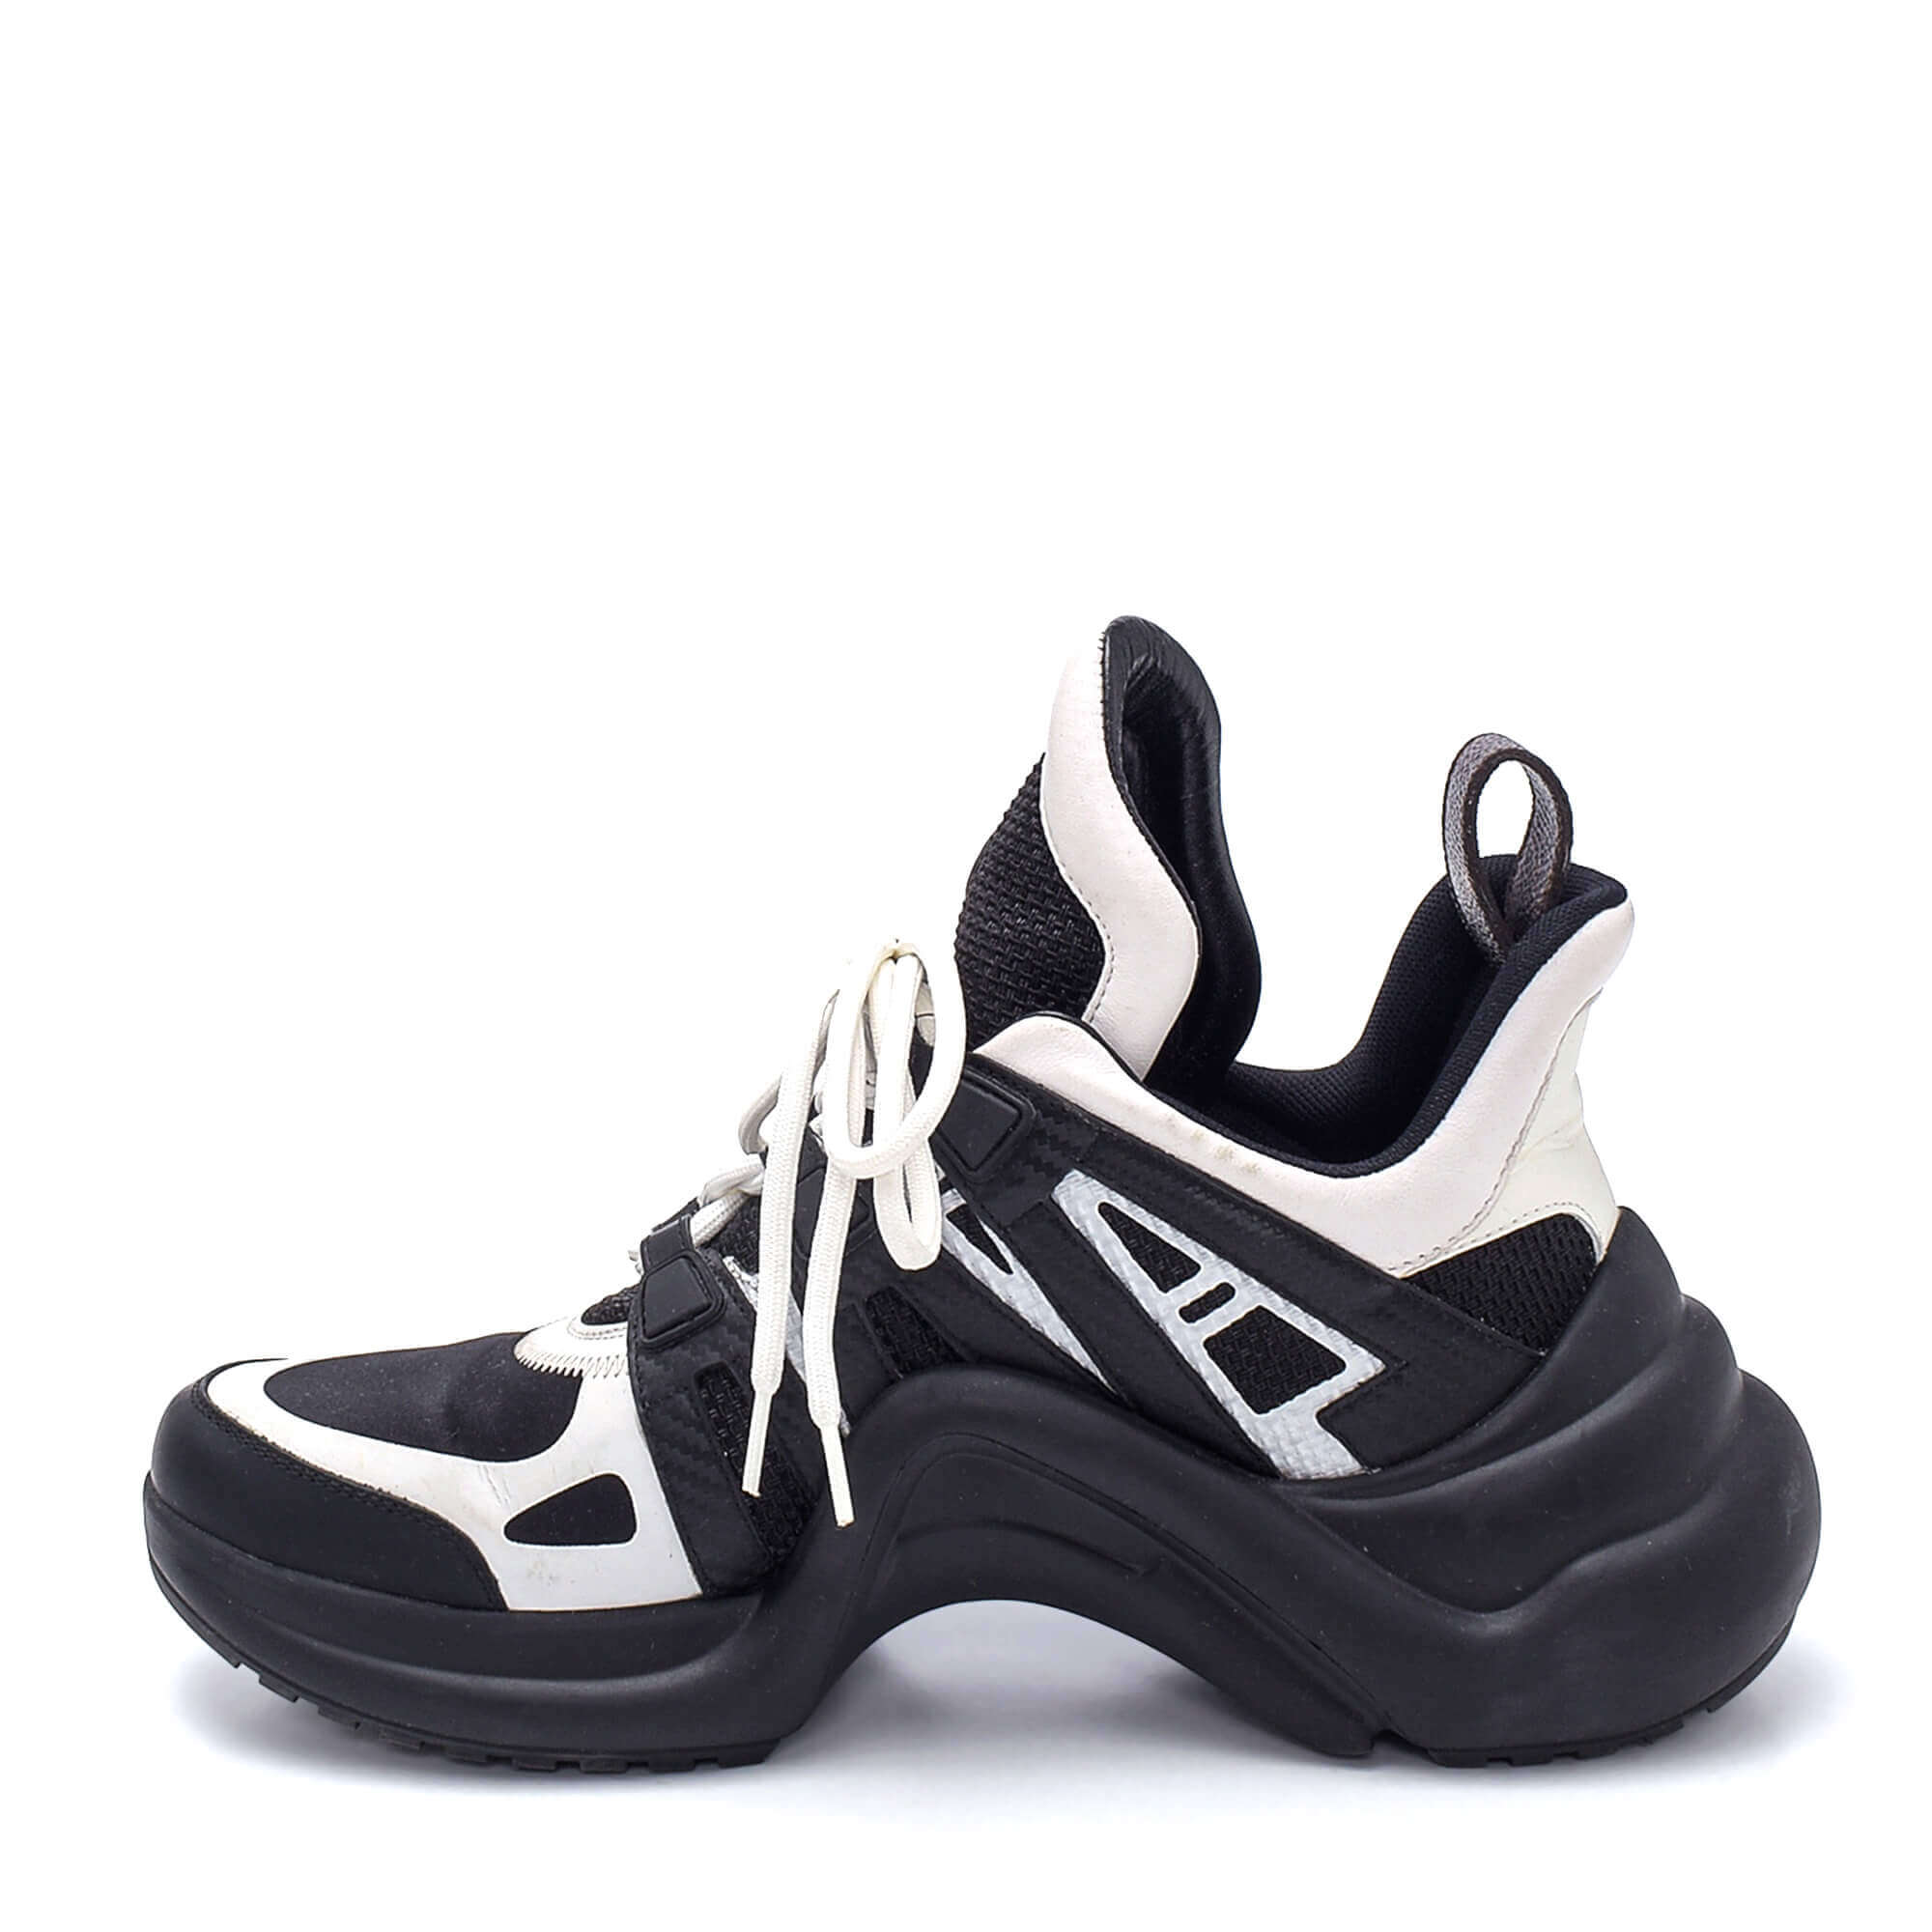 Louis Vuitton - Black & White Leather Fabric Archlight Sneakers